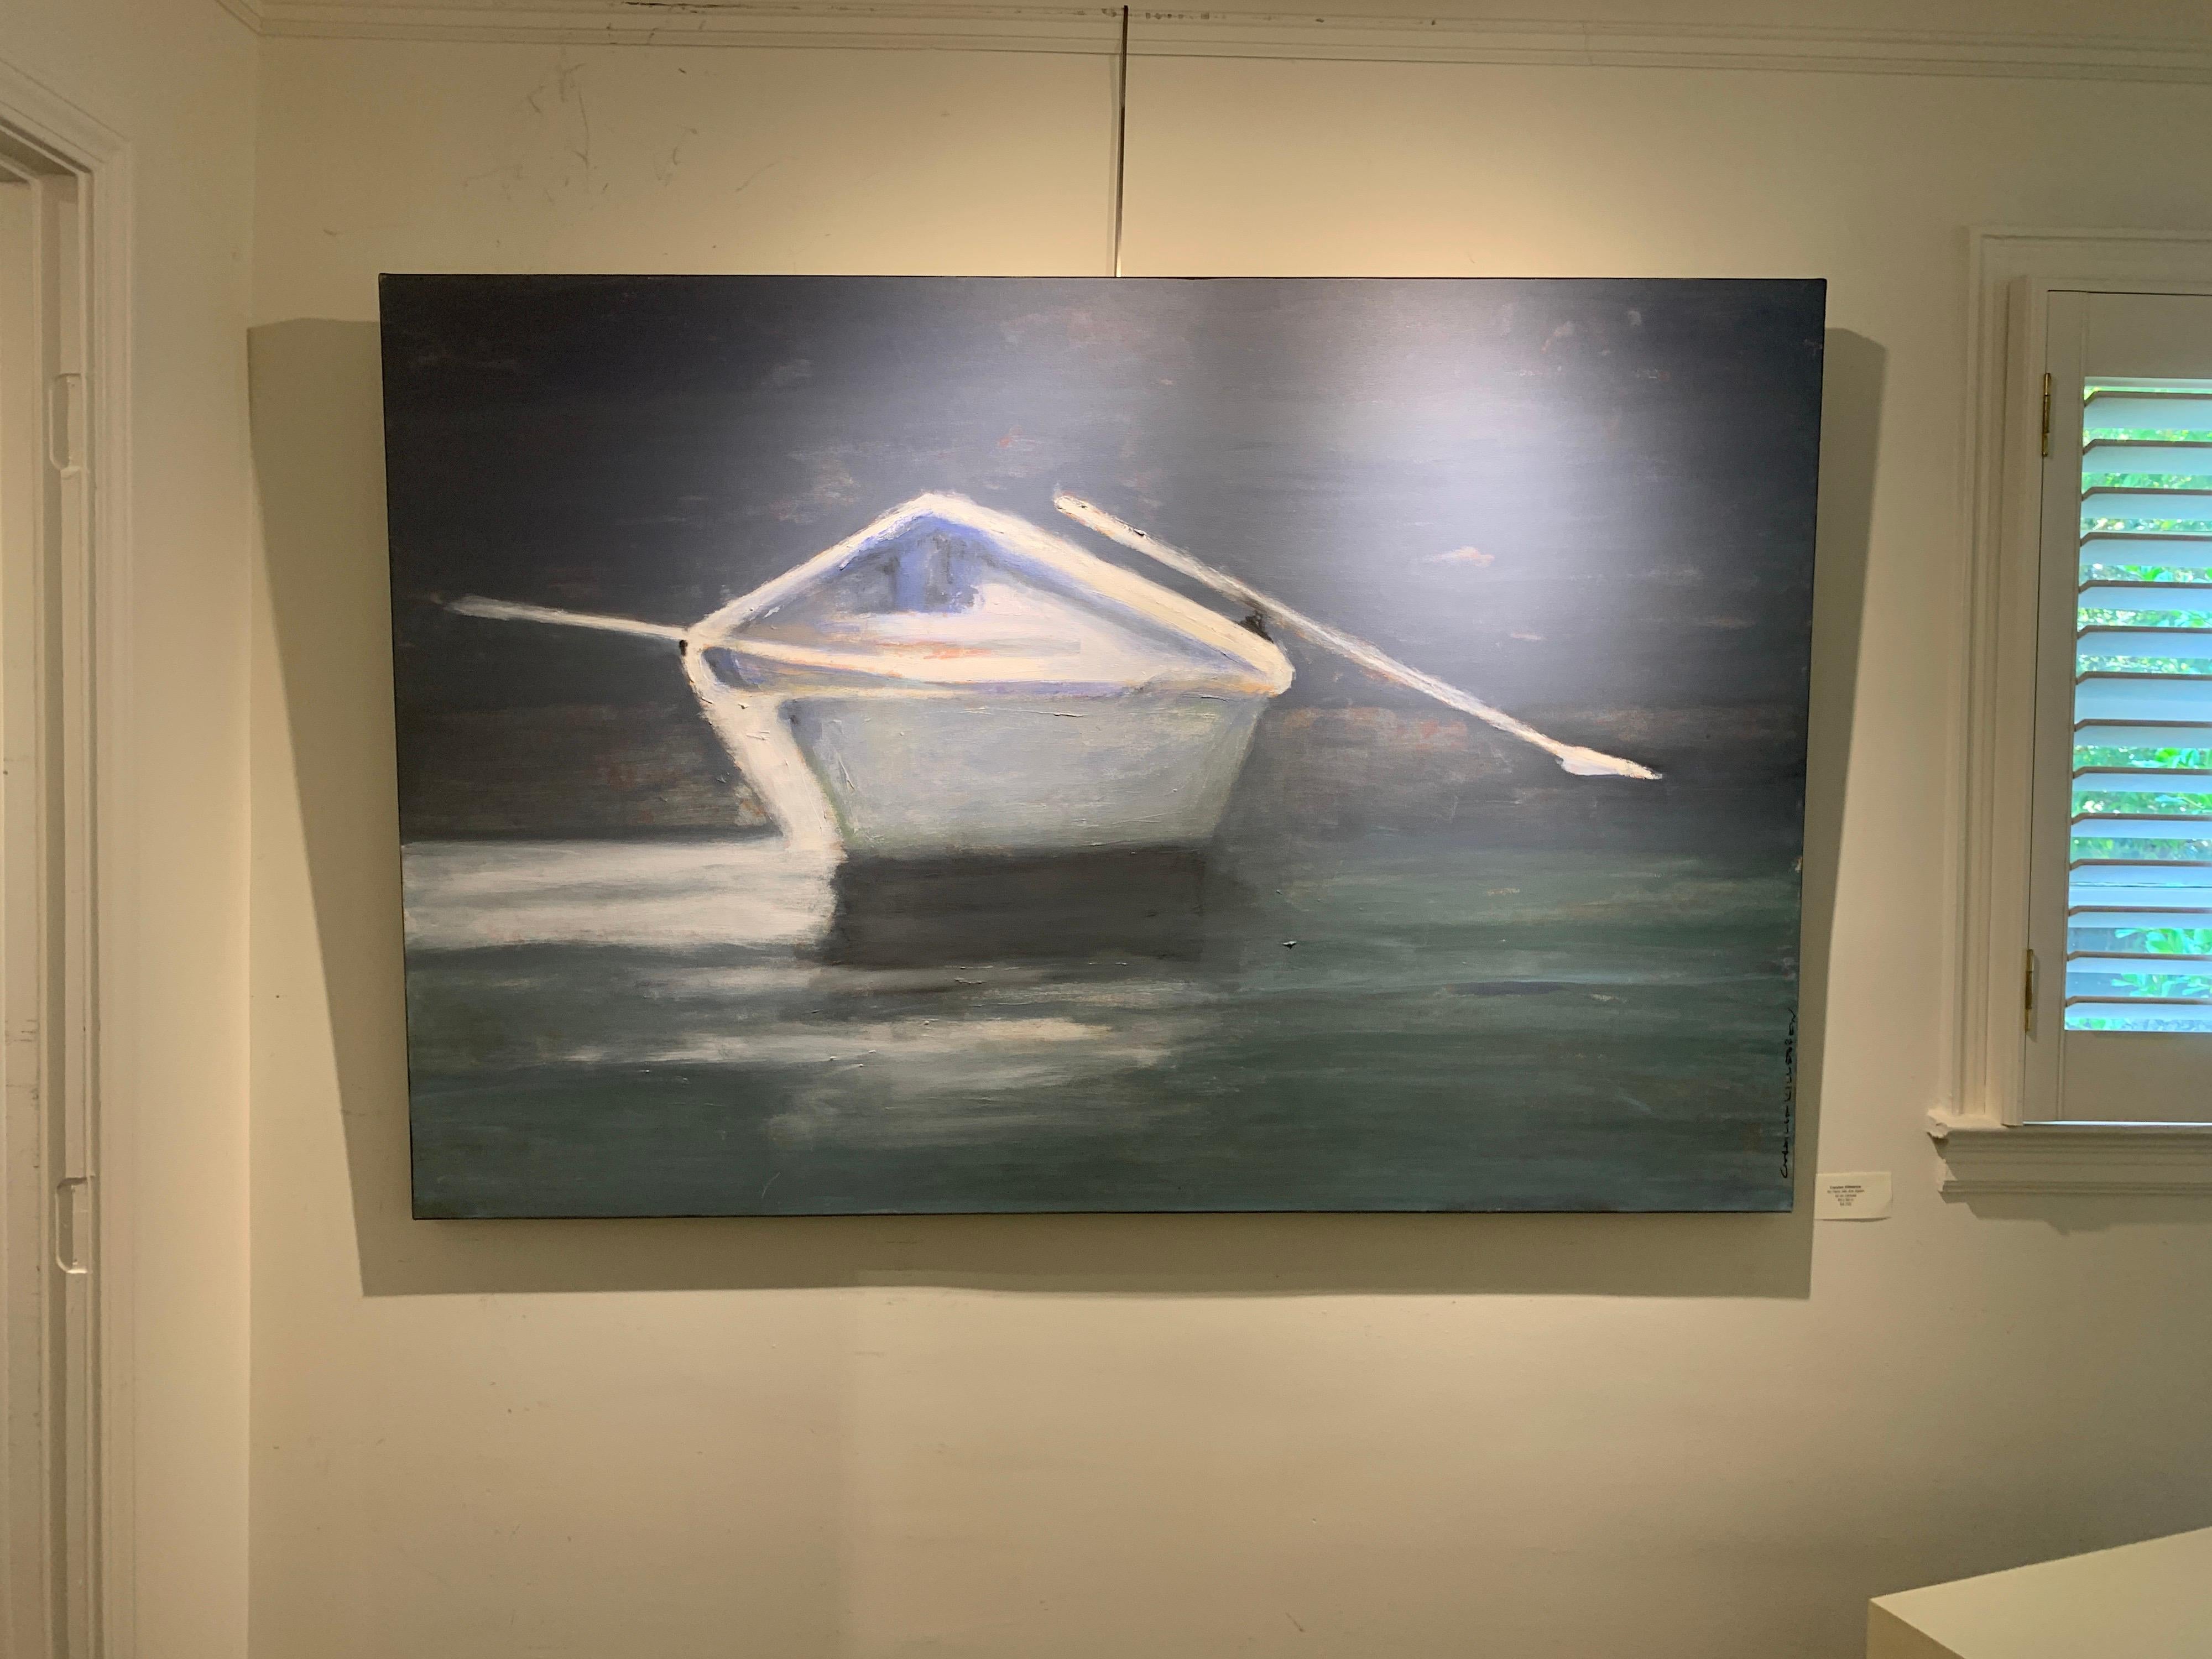 'So Here we Are Again' Large Contemporary Boat Oil on Canvas Painting - Blue Figurative Painting by Carylon Killebrew